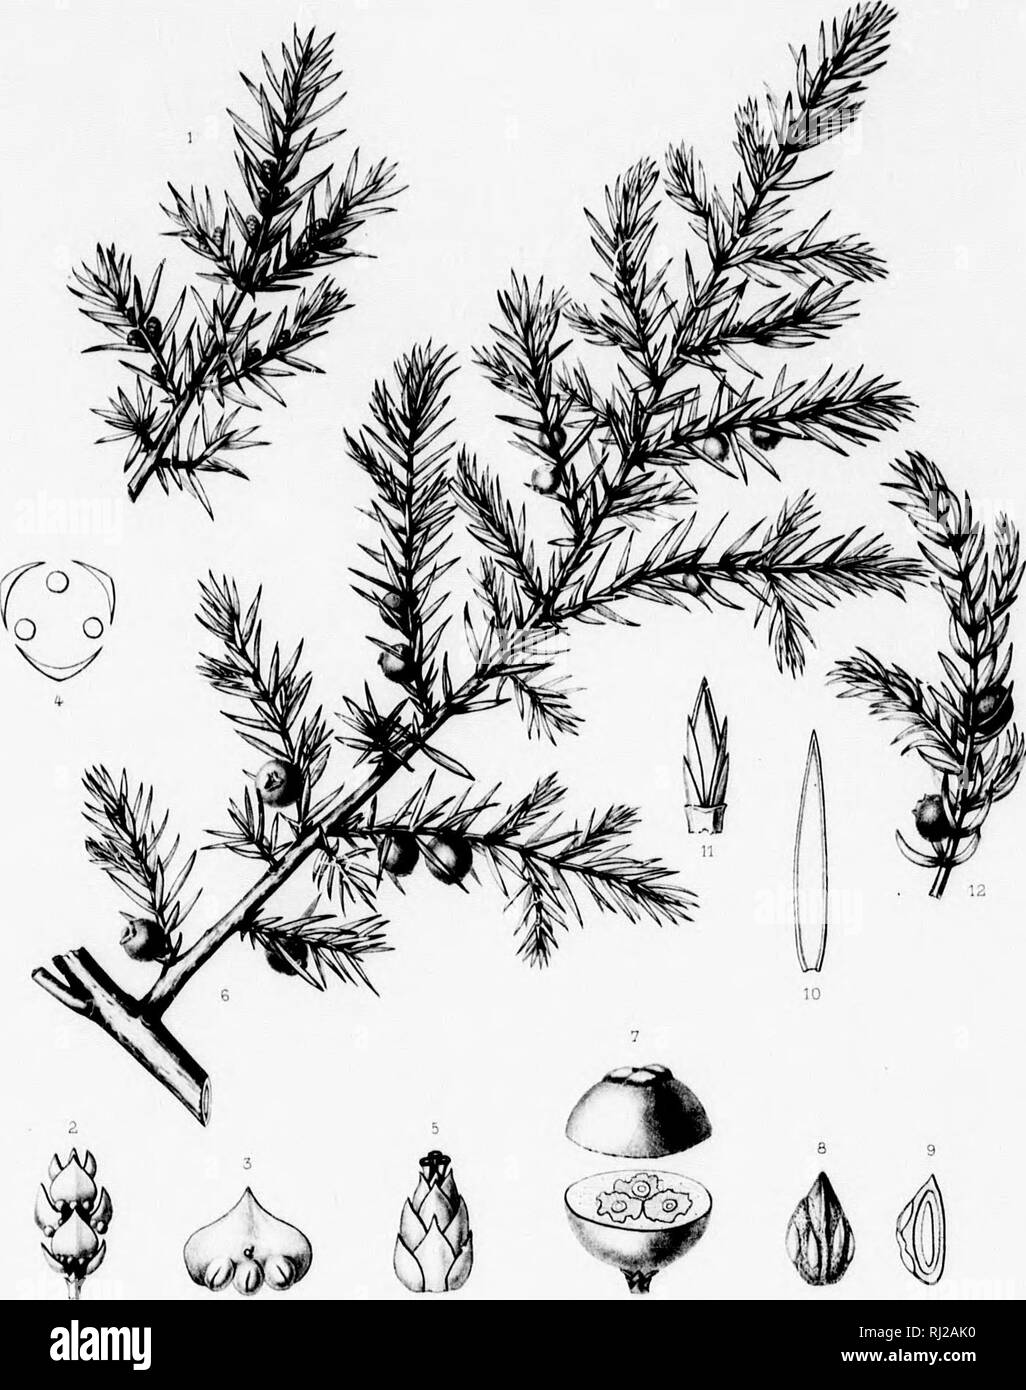 . The silva of North America [microform] : a description of the tree which grow naturally in North America exclusive of Mexico. Trees; Trees; Monocotyledons; Gymnosperms; Arbres; Arbres; MonocotylÃ©dones; Gymnospermes. Lamlly ill Â»'&quot;itKcrn lit frij'ii 8ii*&quot;lr 'ift* lar'M Iwll von lUc- [2 (crM. S)n ). â Silvd of North America. Tab DXVl.. ' f:.f'.uron i/tv'. ///&gt;'.,/&lt;/ , JUNIPERUS COMMUNIS, ,/ /I'ii't-r-rti.i tfirwr ', /ftip.J. 7a Par,. ' tj V Jl i:: 1 .: ! 1 '   ; ; . â ';'- 1 1 , ^ 1 ' ,. Please note that these images are extracted from scanned page images that may have been Stock Photo